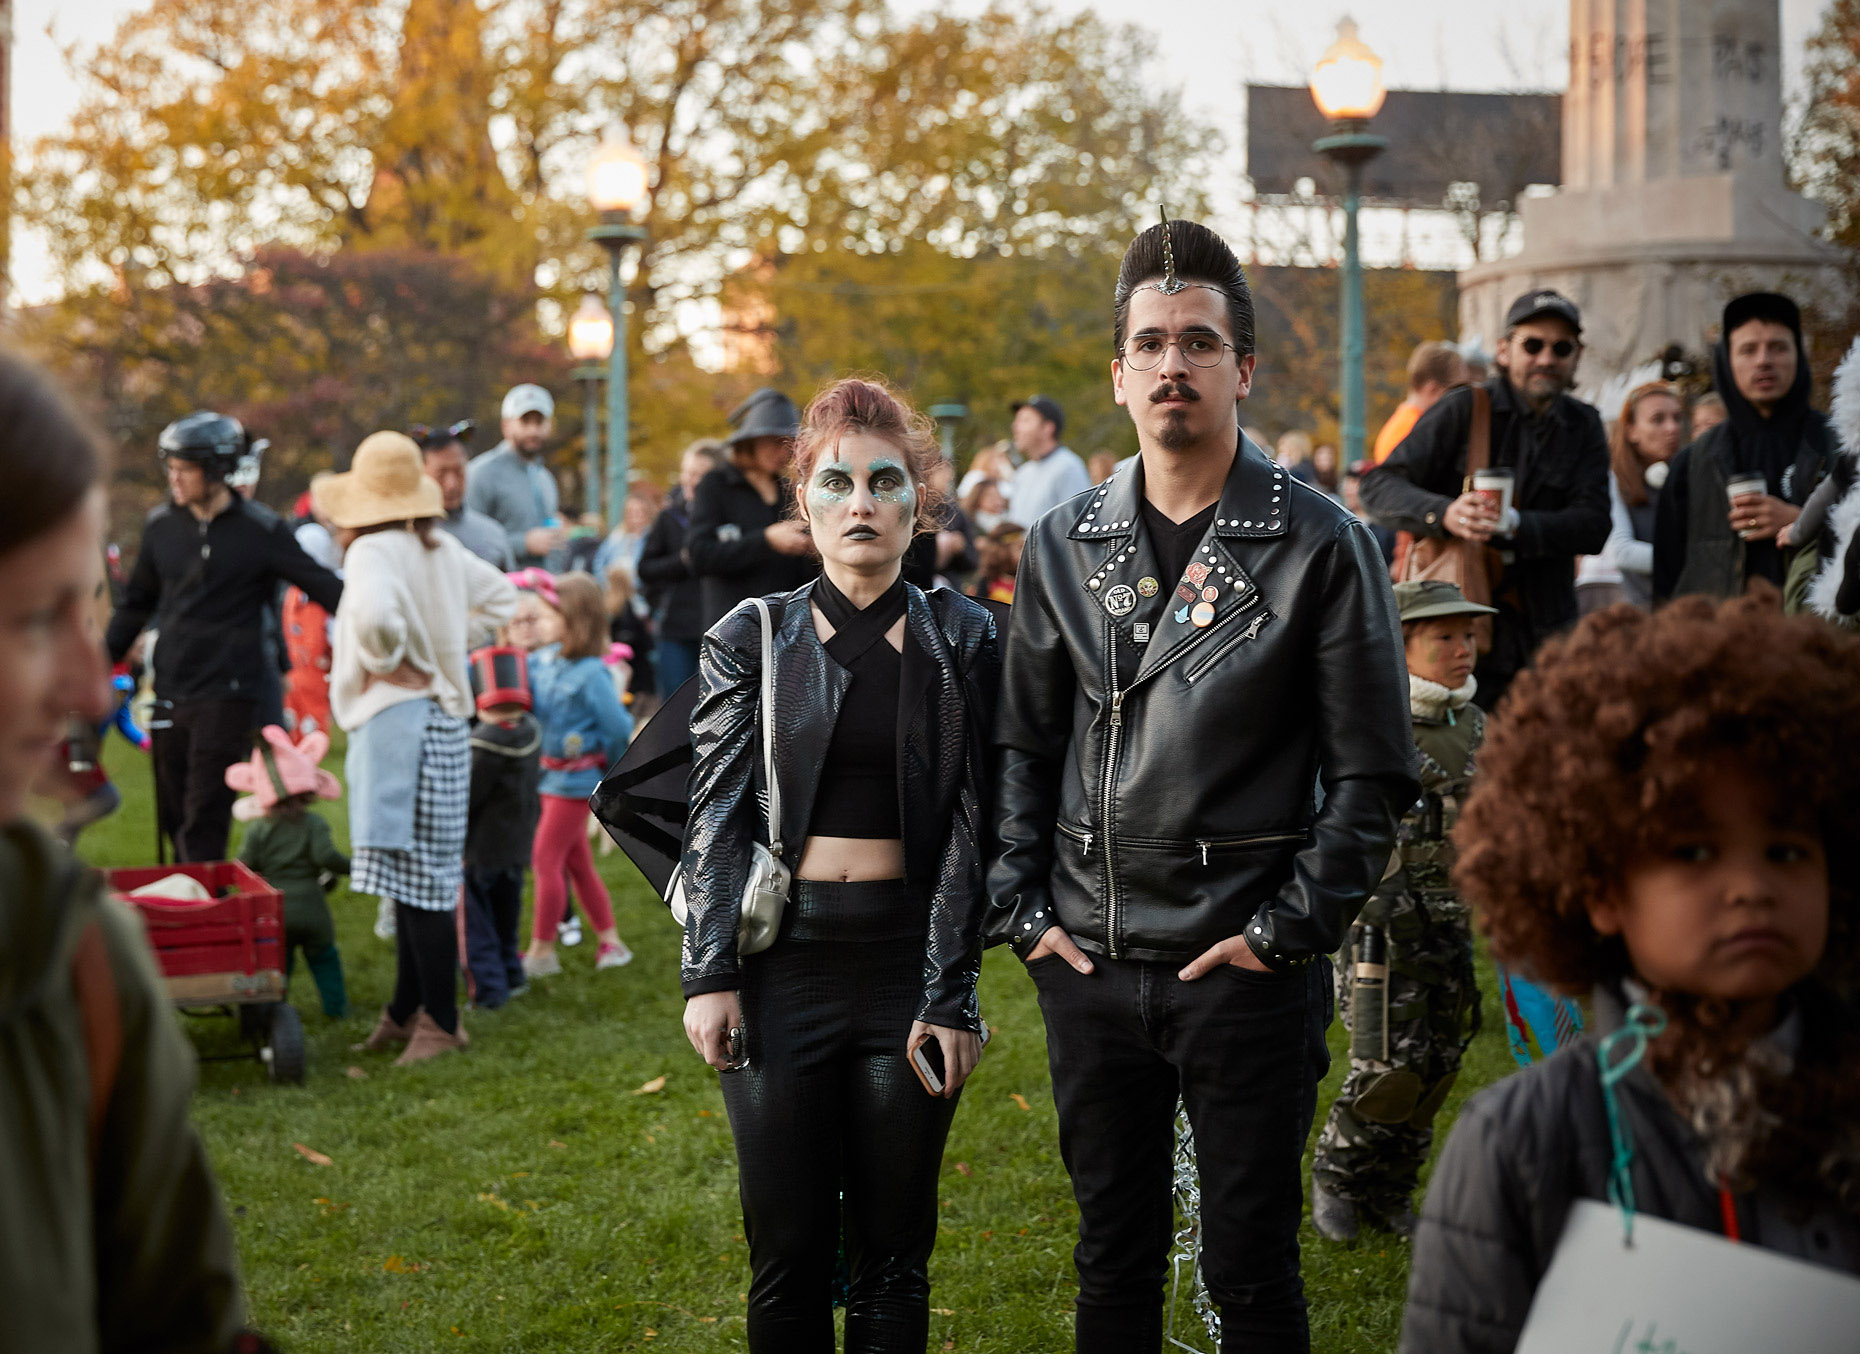 Hipsters at a Halloween parade | lifestyle photography by Saverio Truglia